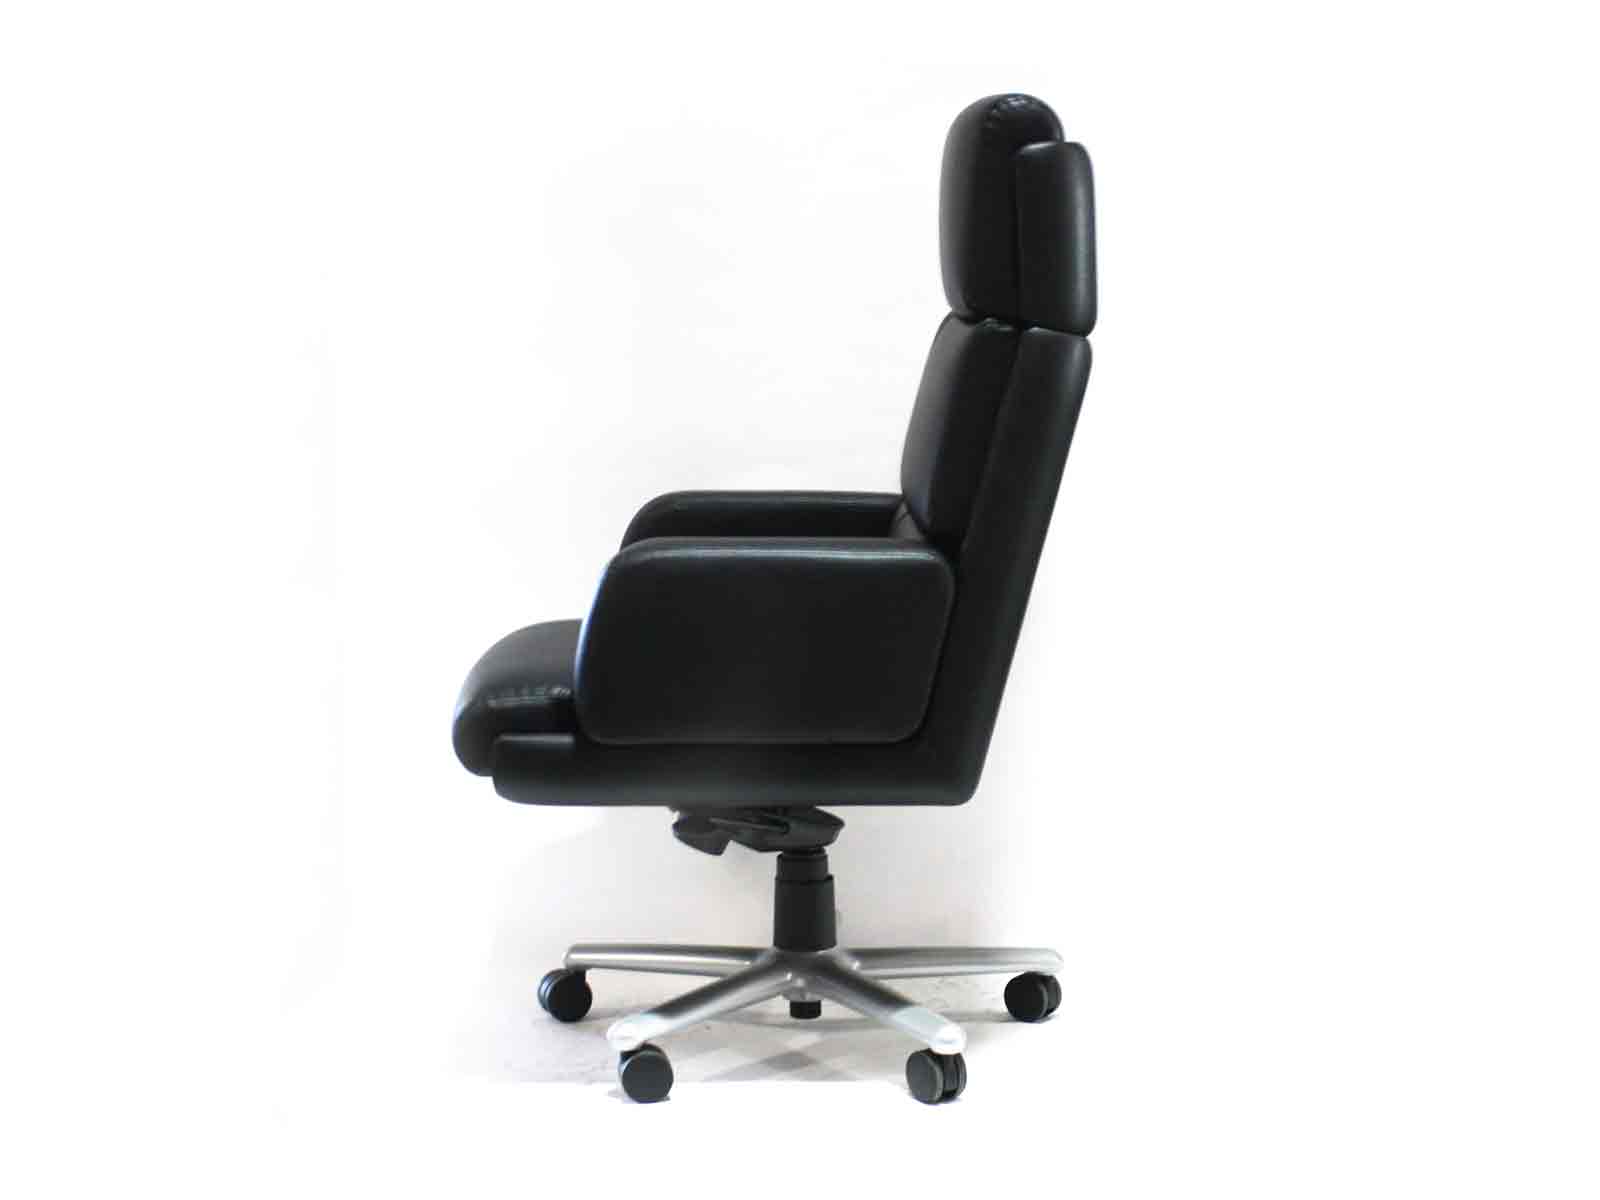 New Black Excecutive Excecutive High Back Office Chairs